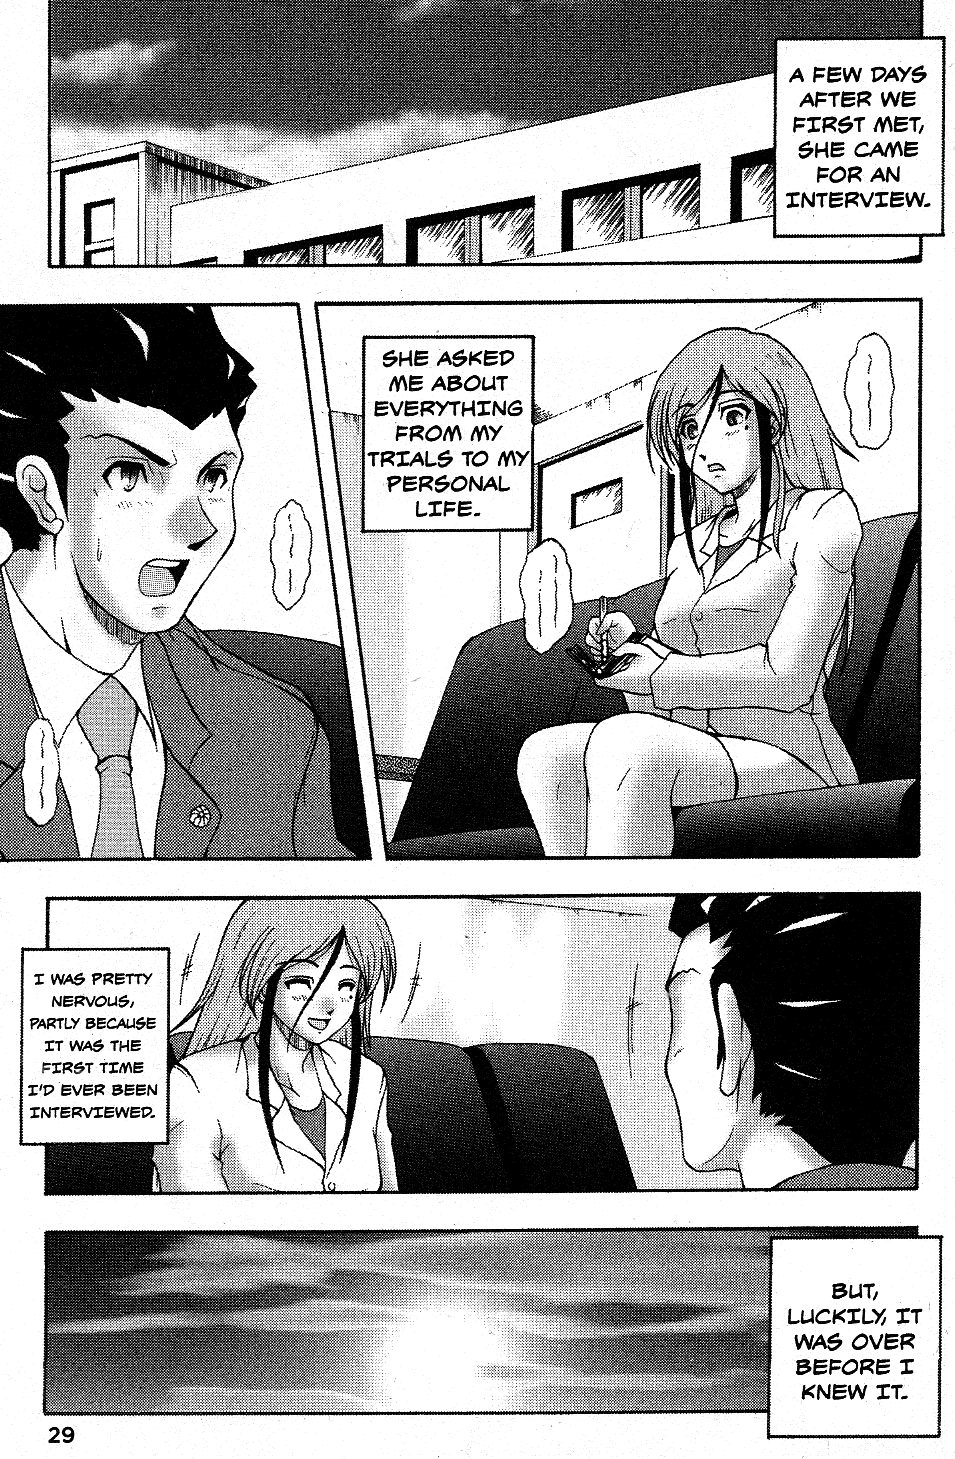 Phoenix Wright: Ace Attorney - Official Casebook Vol.1 Chapter 2: Turnabout Inference - By Kei Nisemura - Picture 3